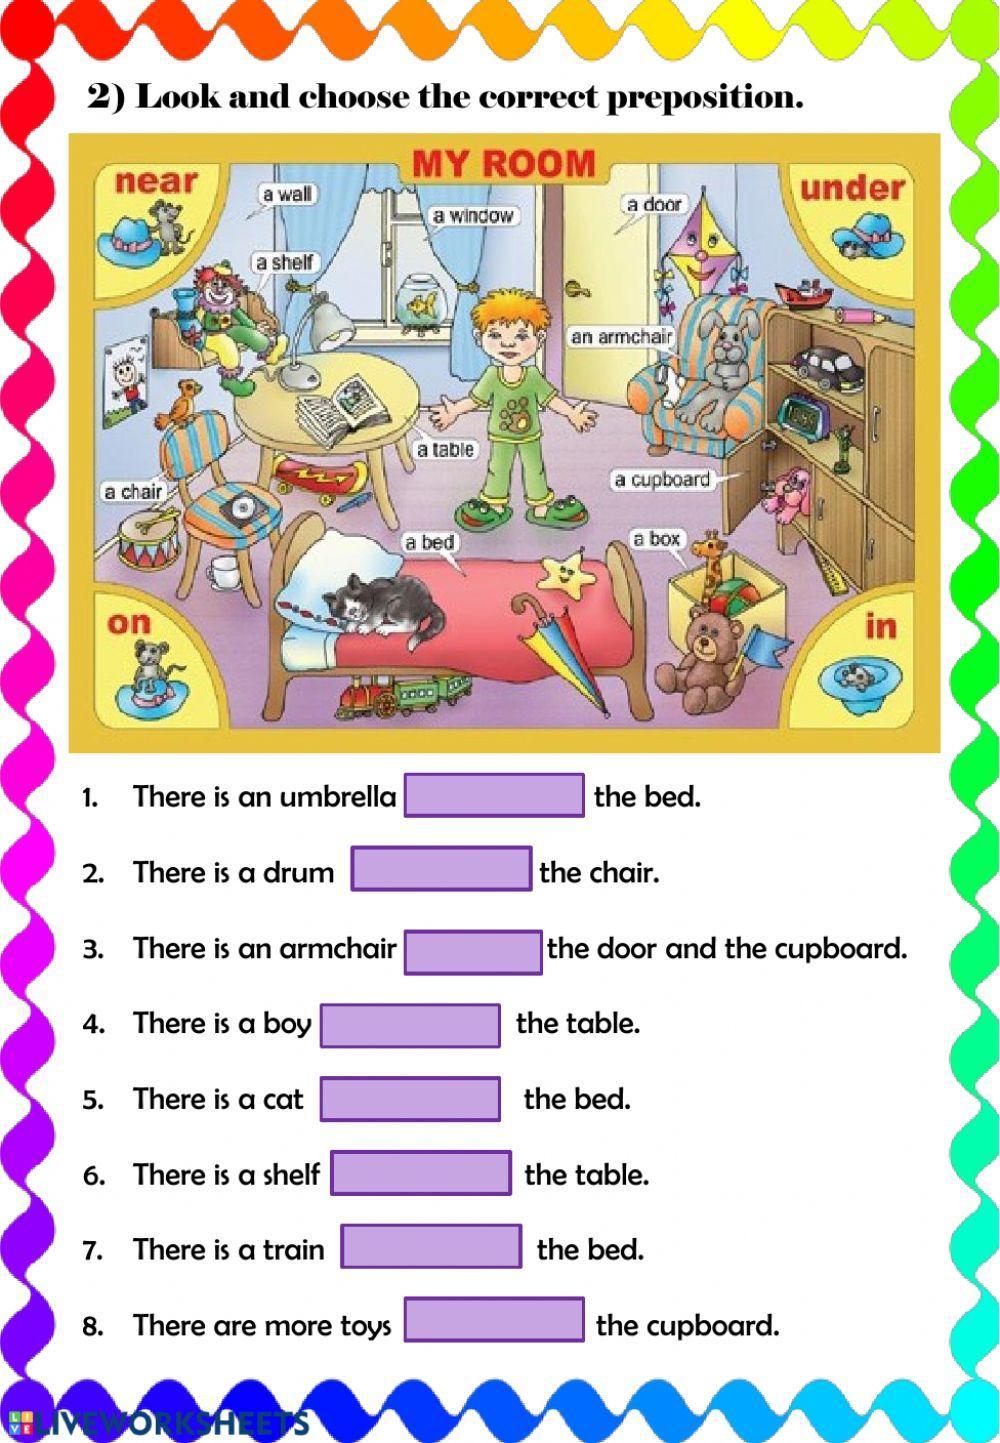 Prepositions of Place - 4 activities